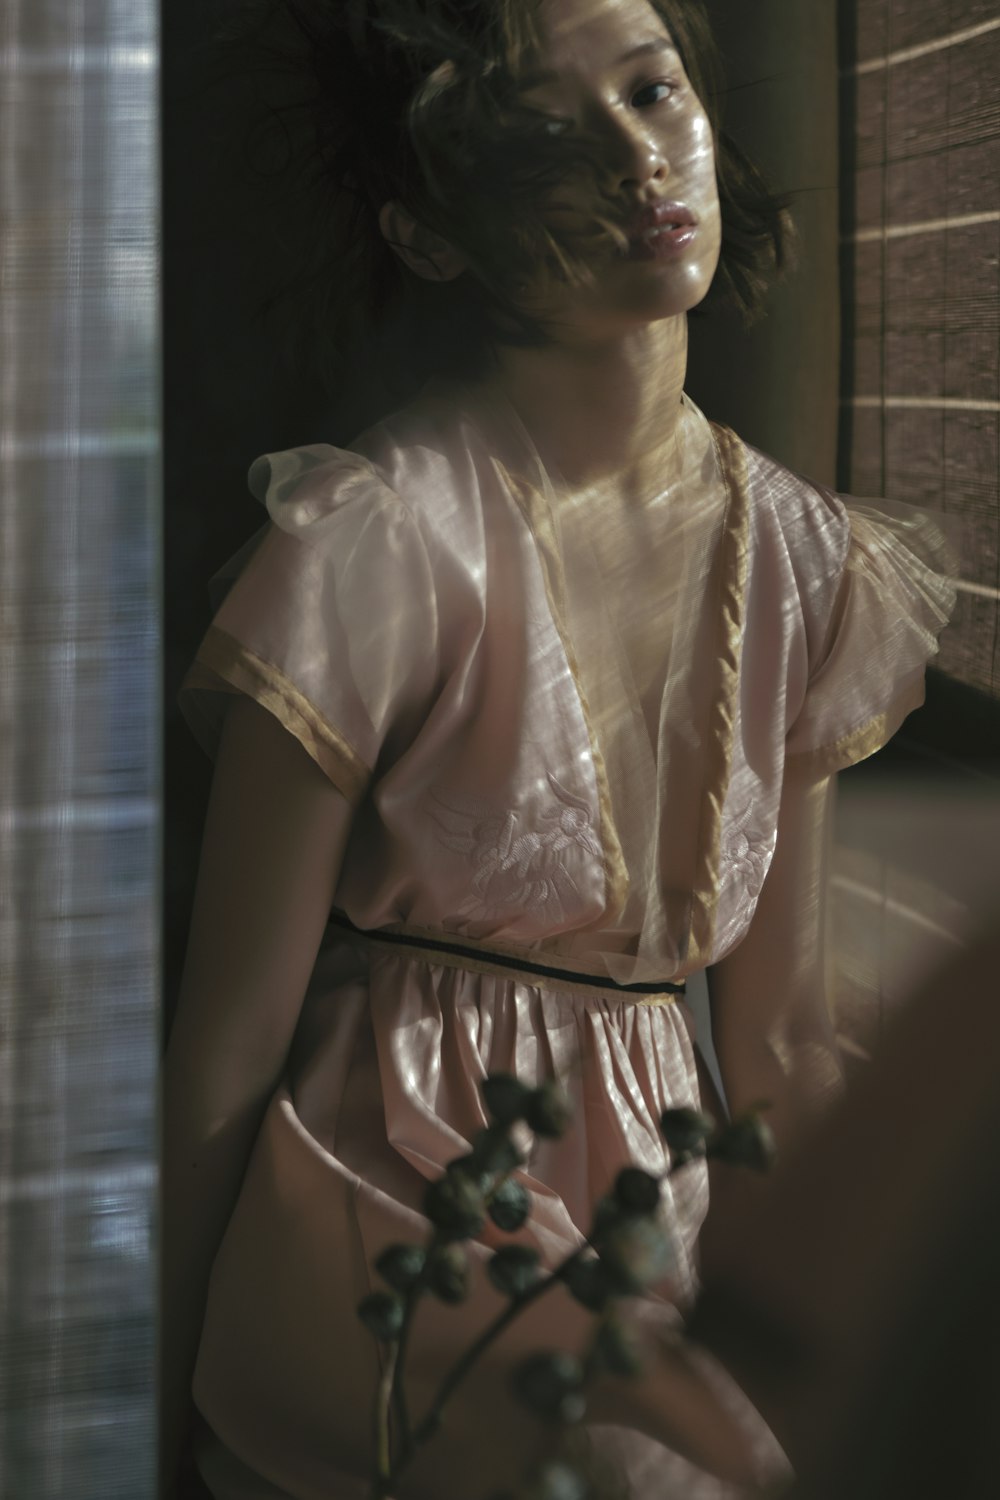 a woman in a pink dress standing next to a window